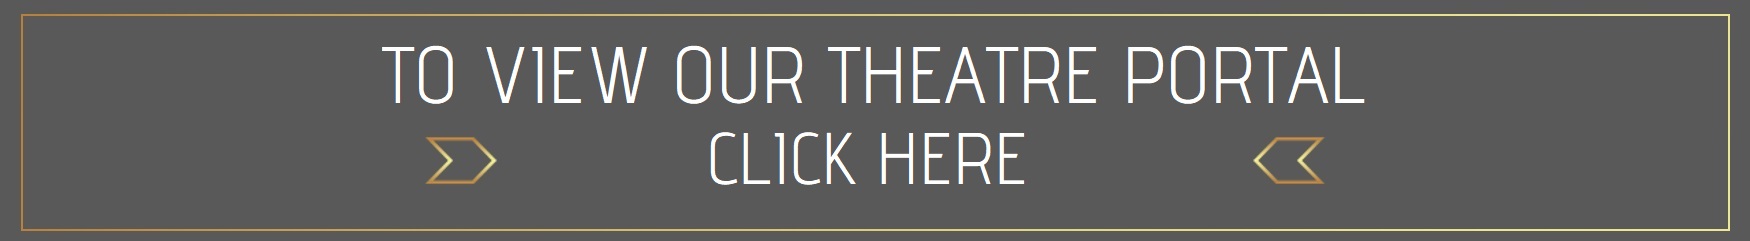 click here for premium theatre seats at the West End, at unbeatable prices